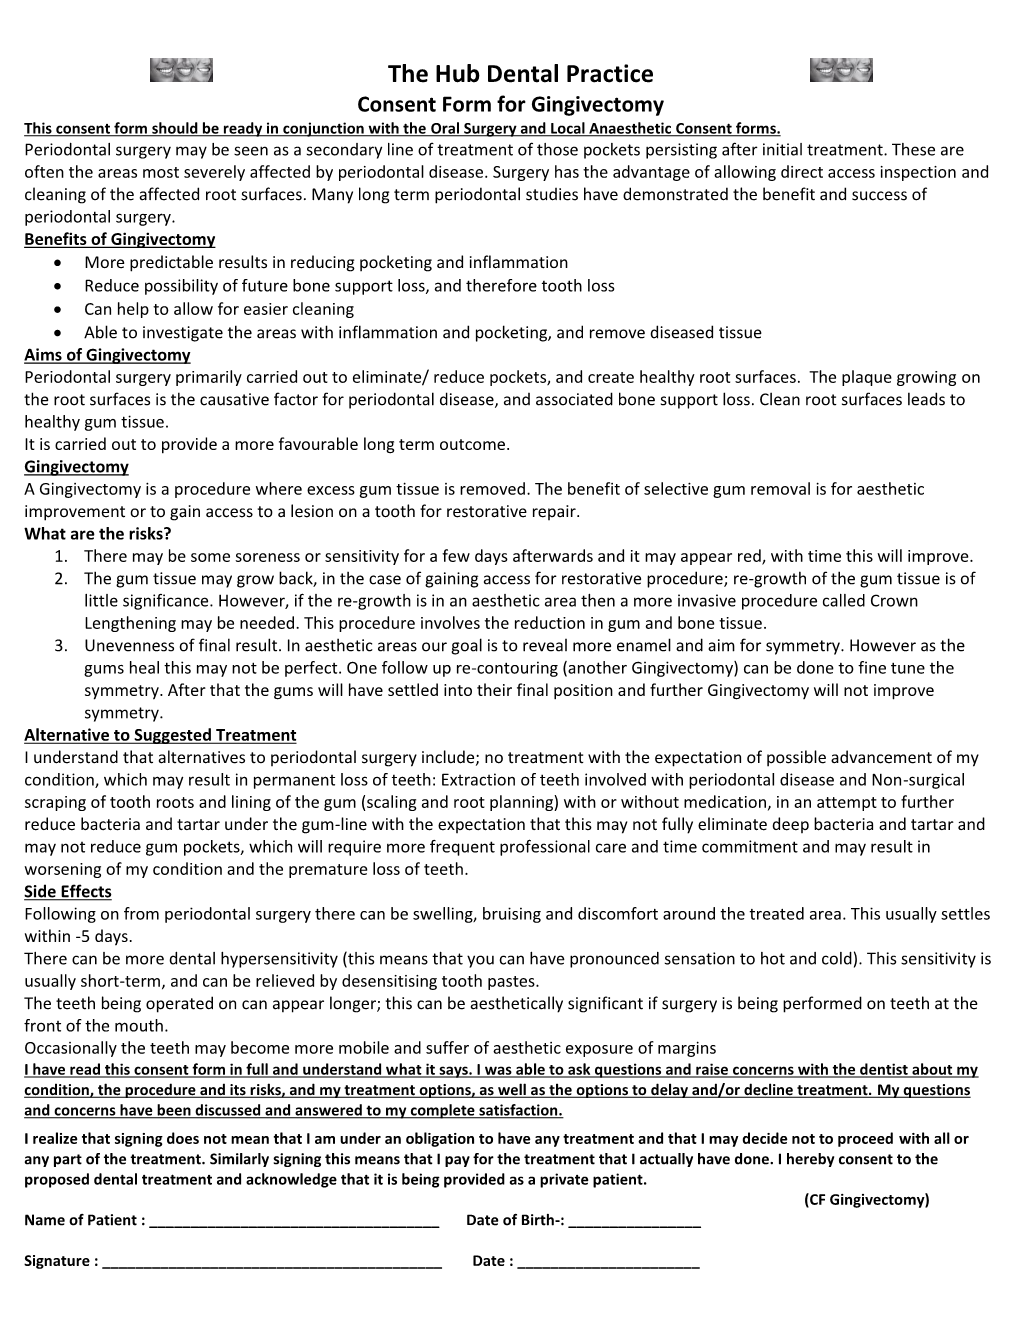 Consent Form for Gingivectomy This Consent Form Should Be Ready in Conjunction with the Oral Surgery and Local Anaesthetic Consent Forms